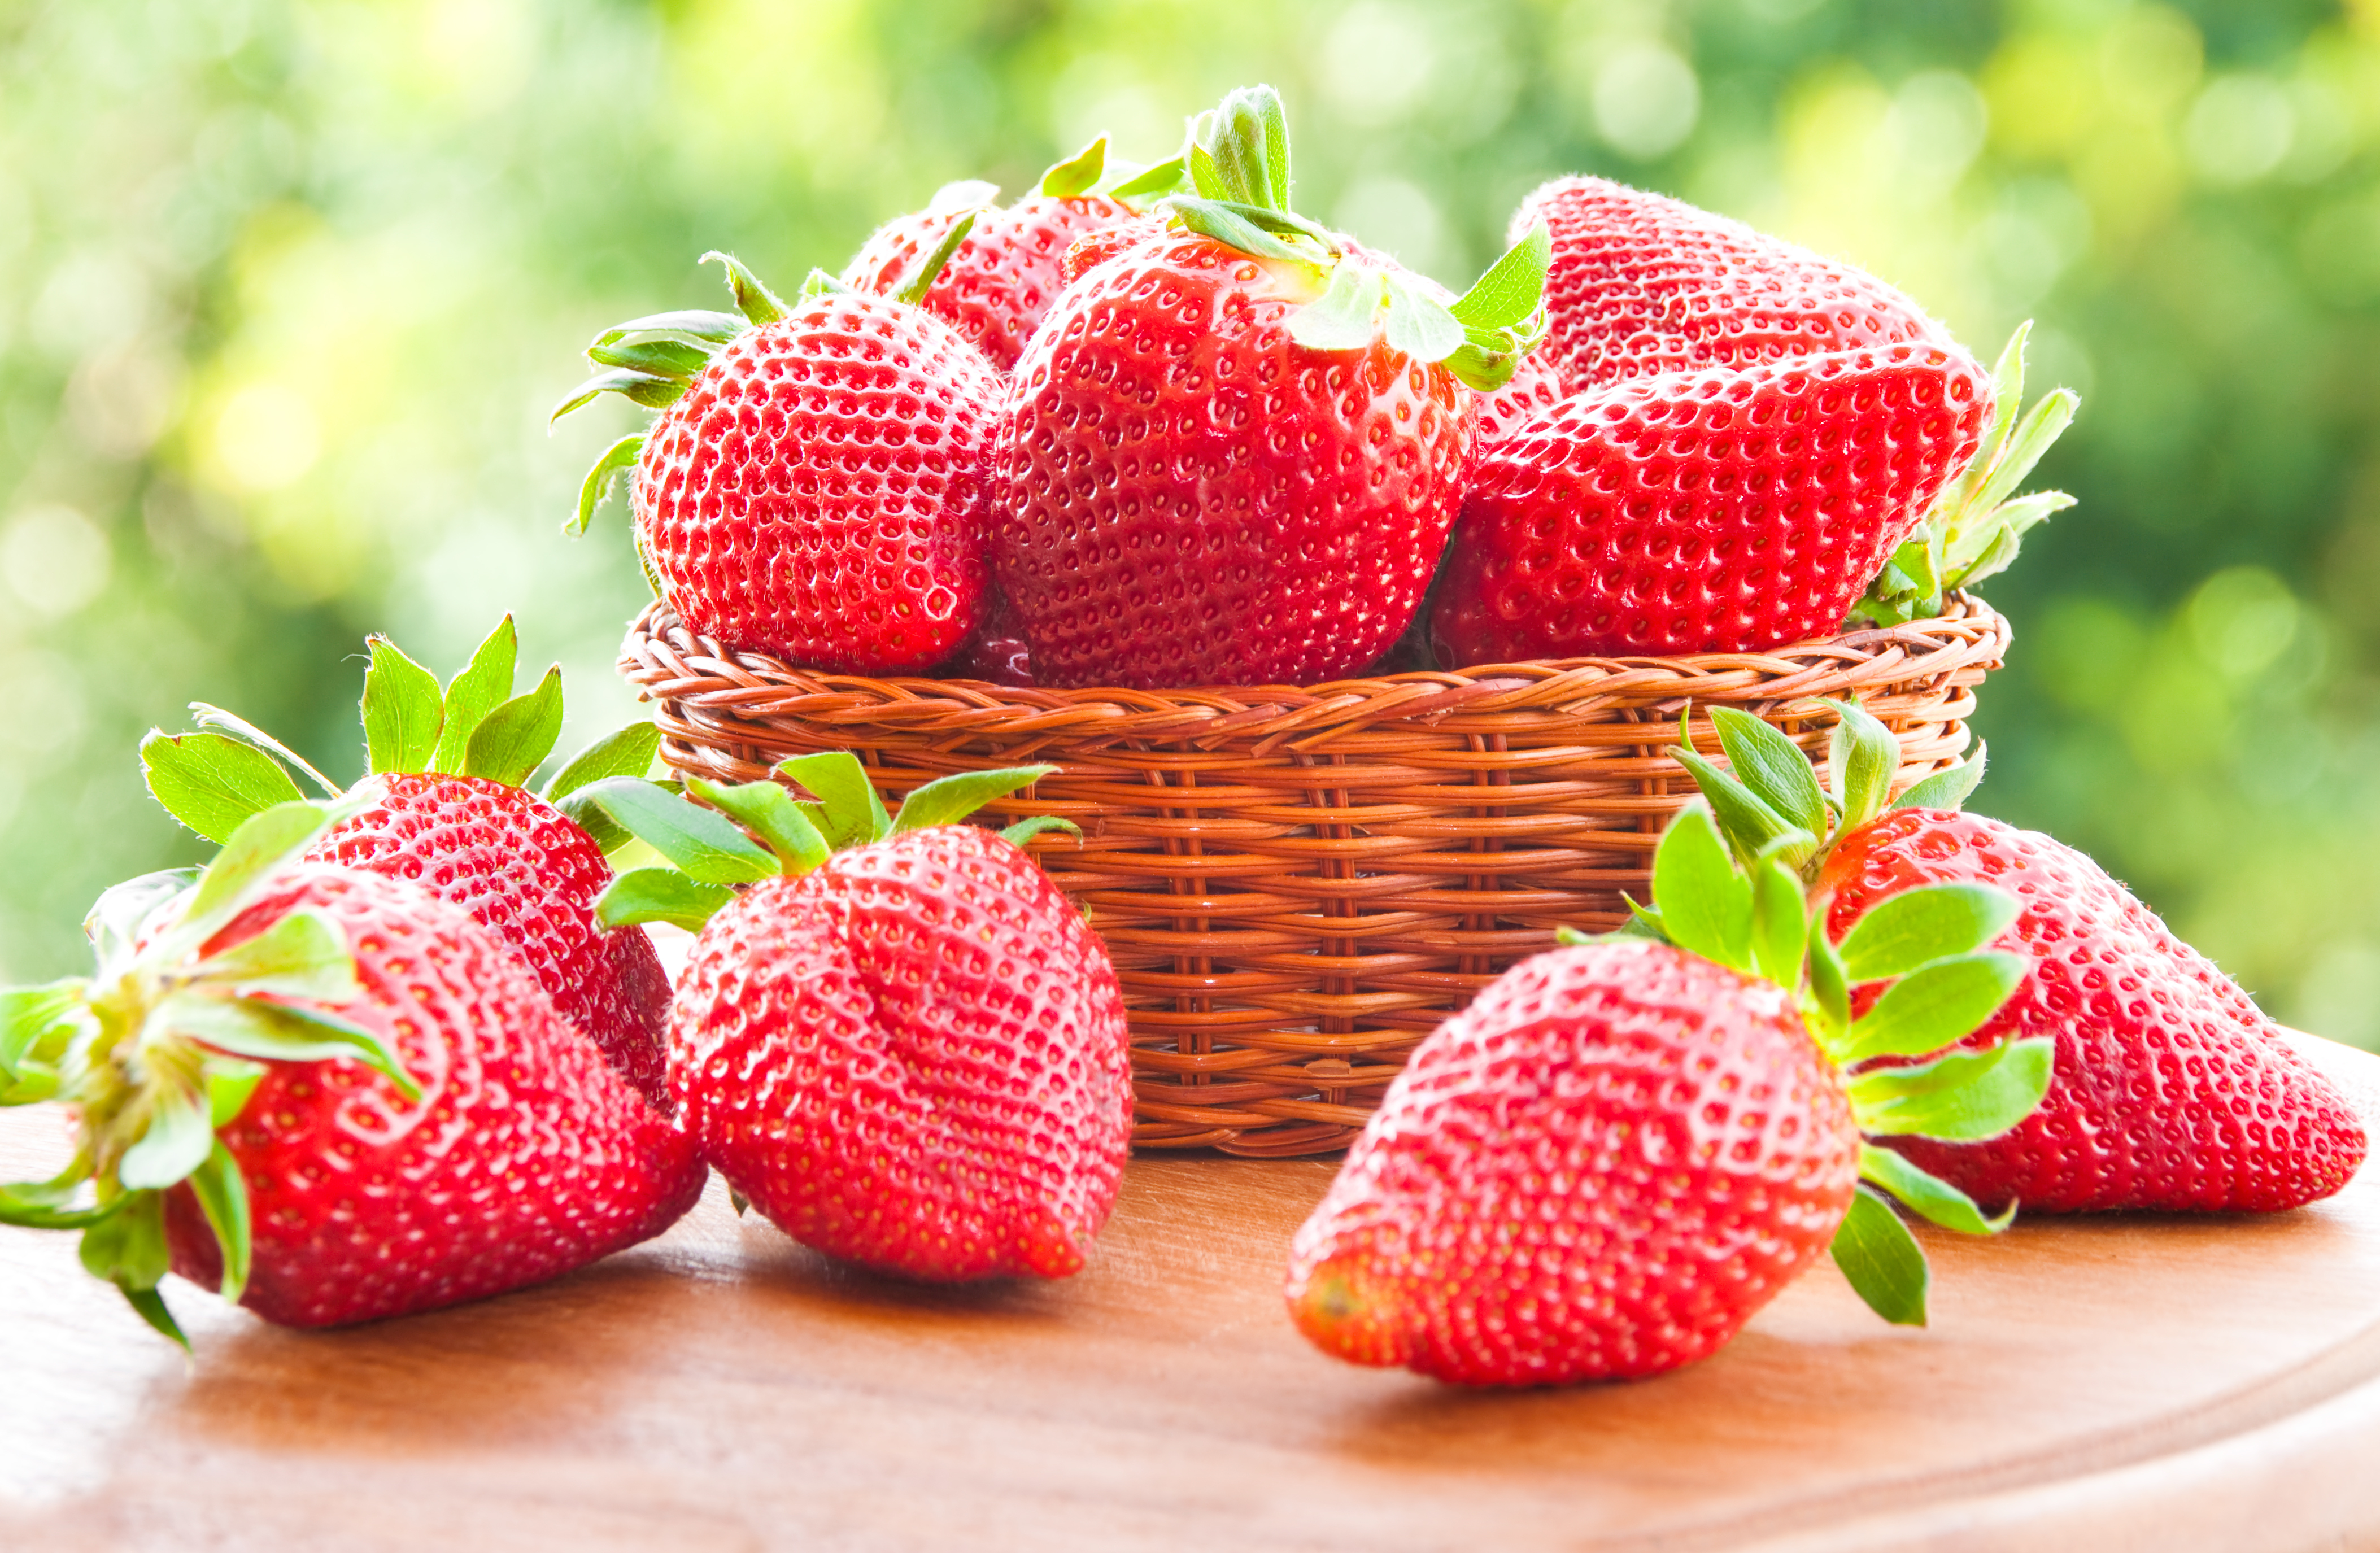 strawberry, food, basket, berry, red, fruits